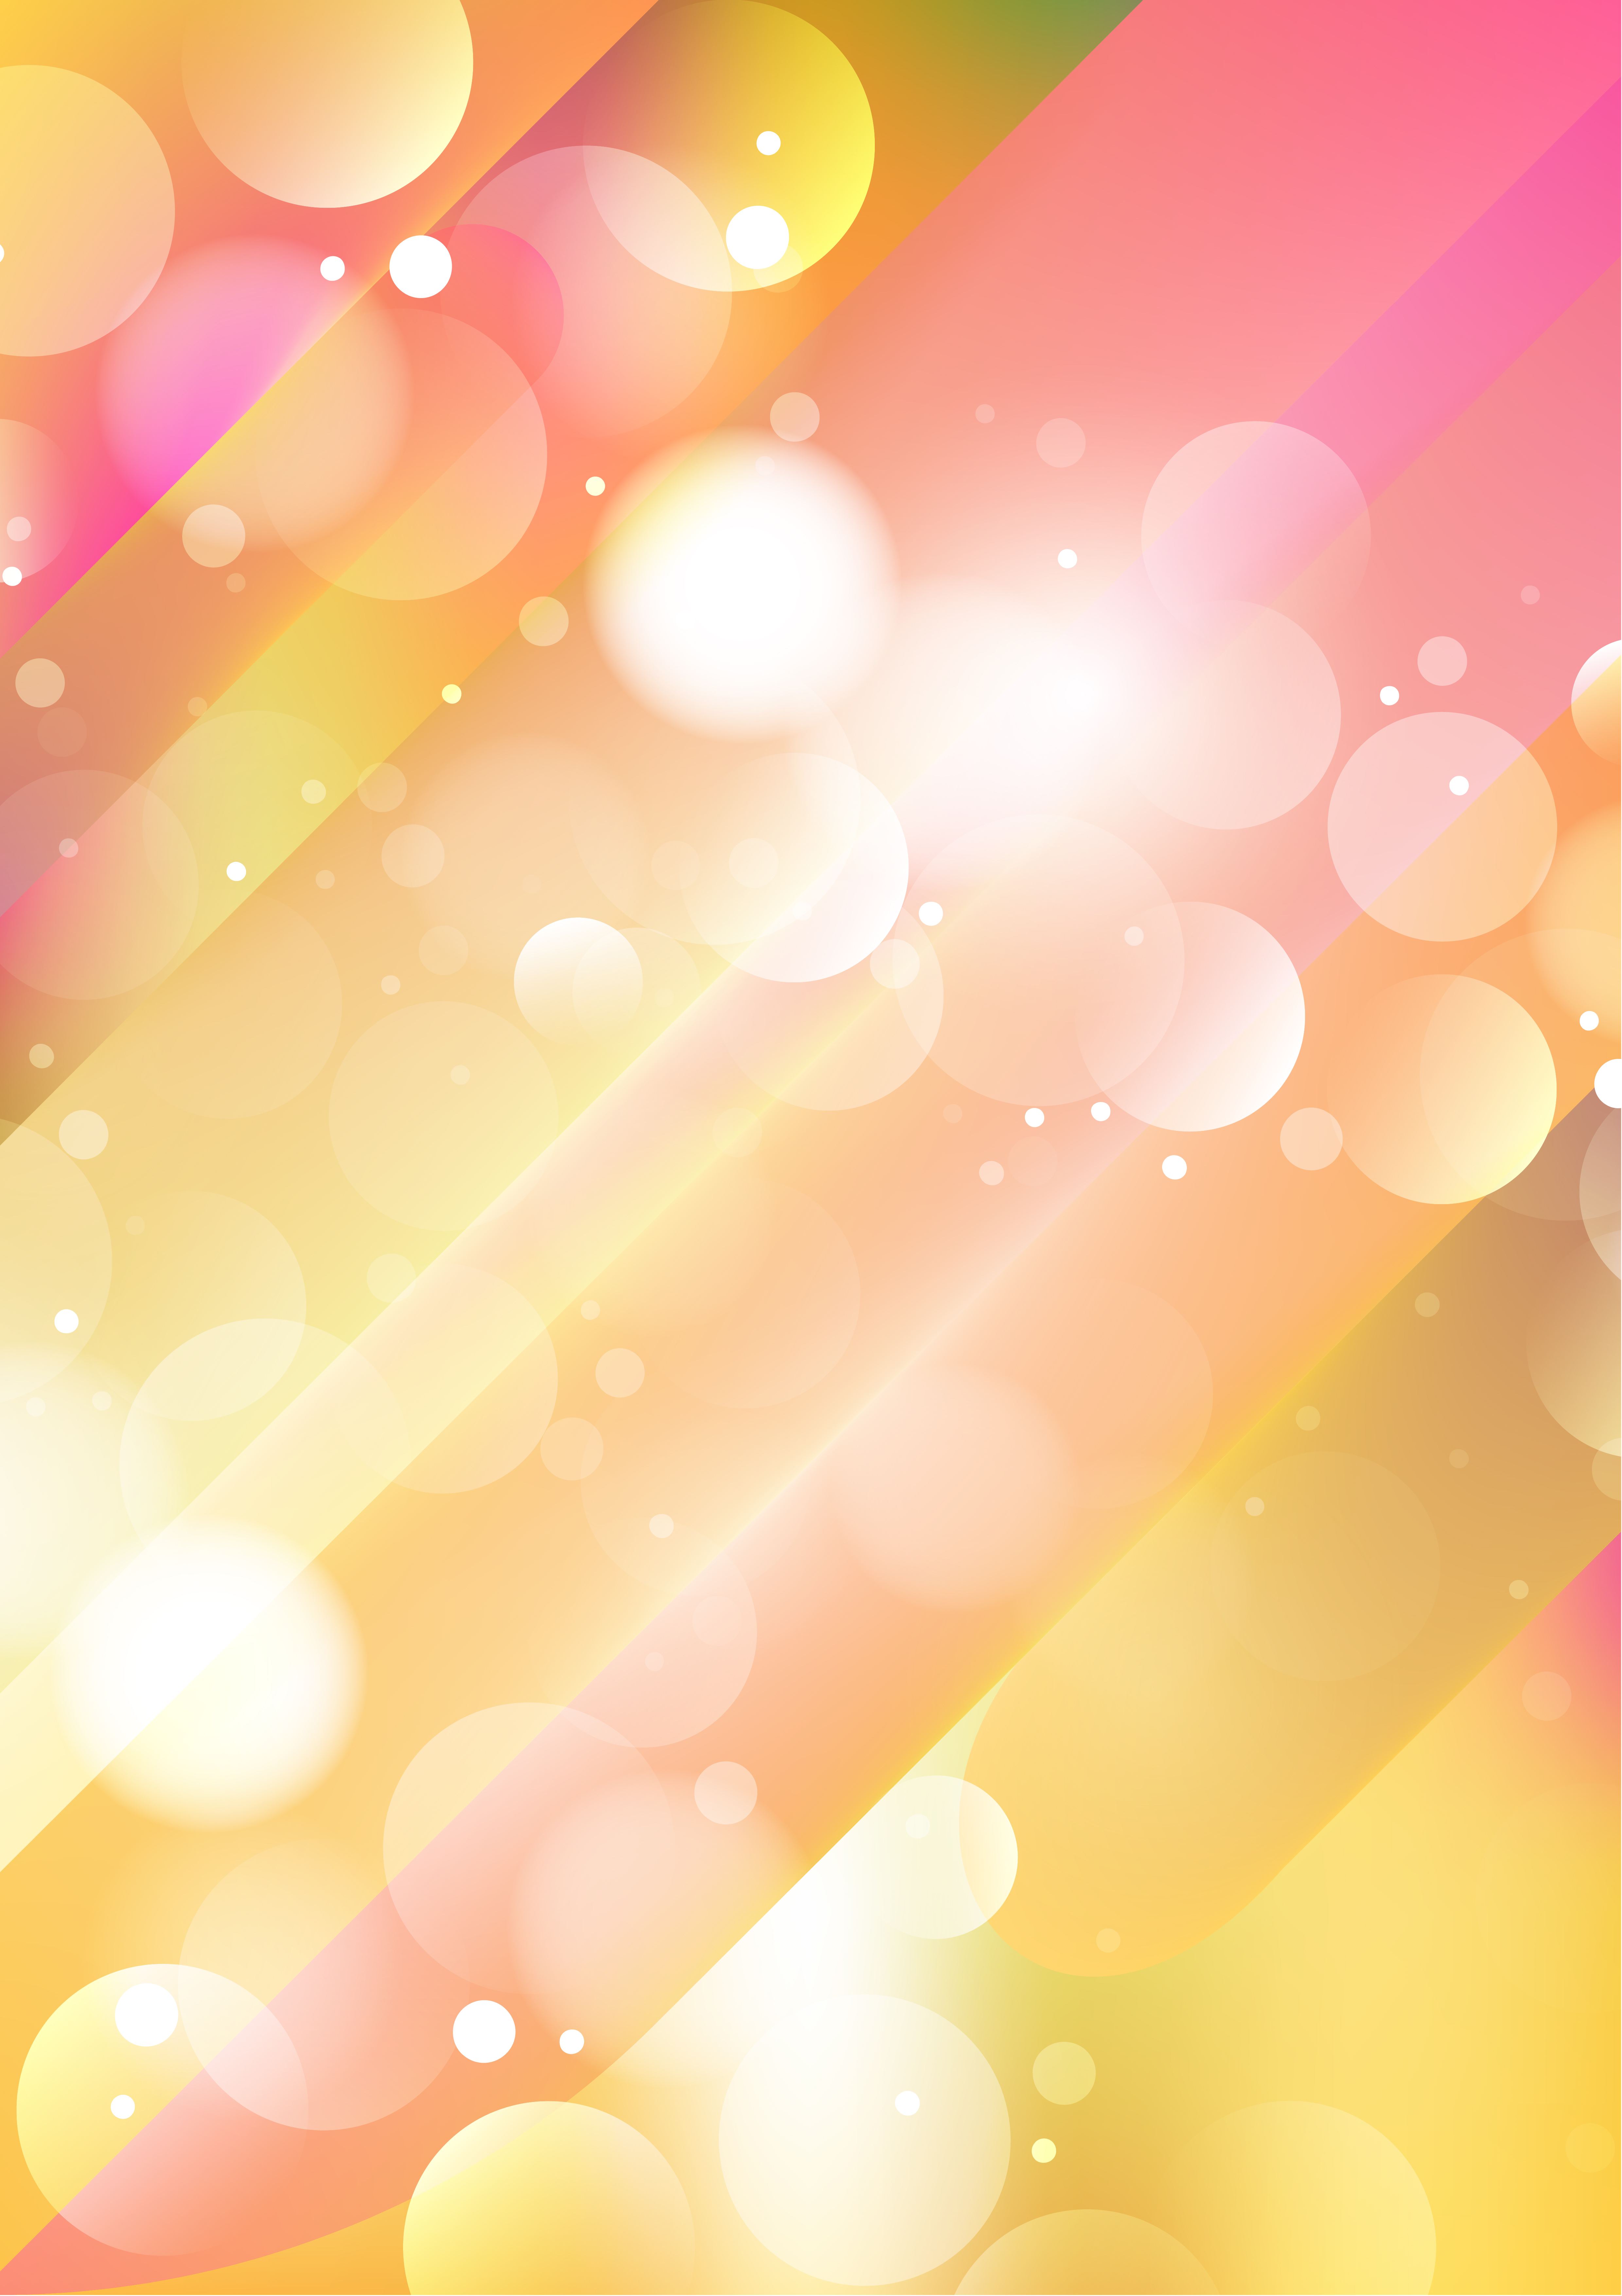 Free Abstract Shiny Pink Yellow and White Background